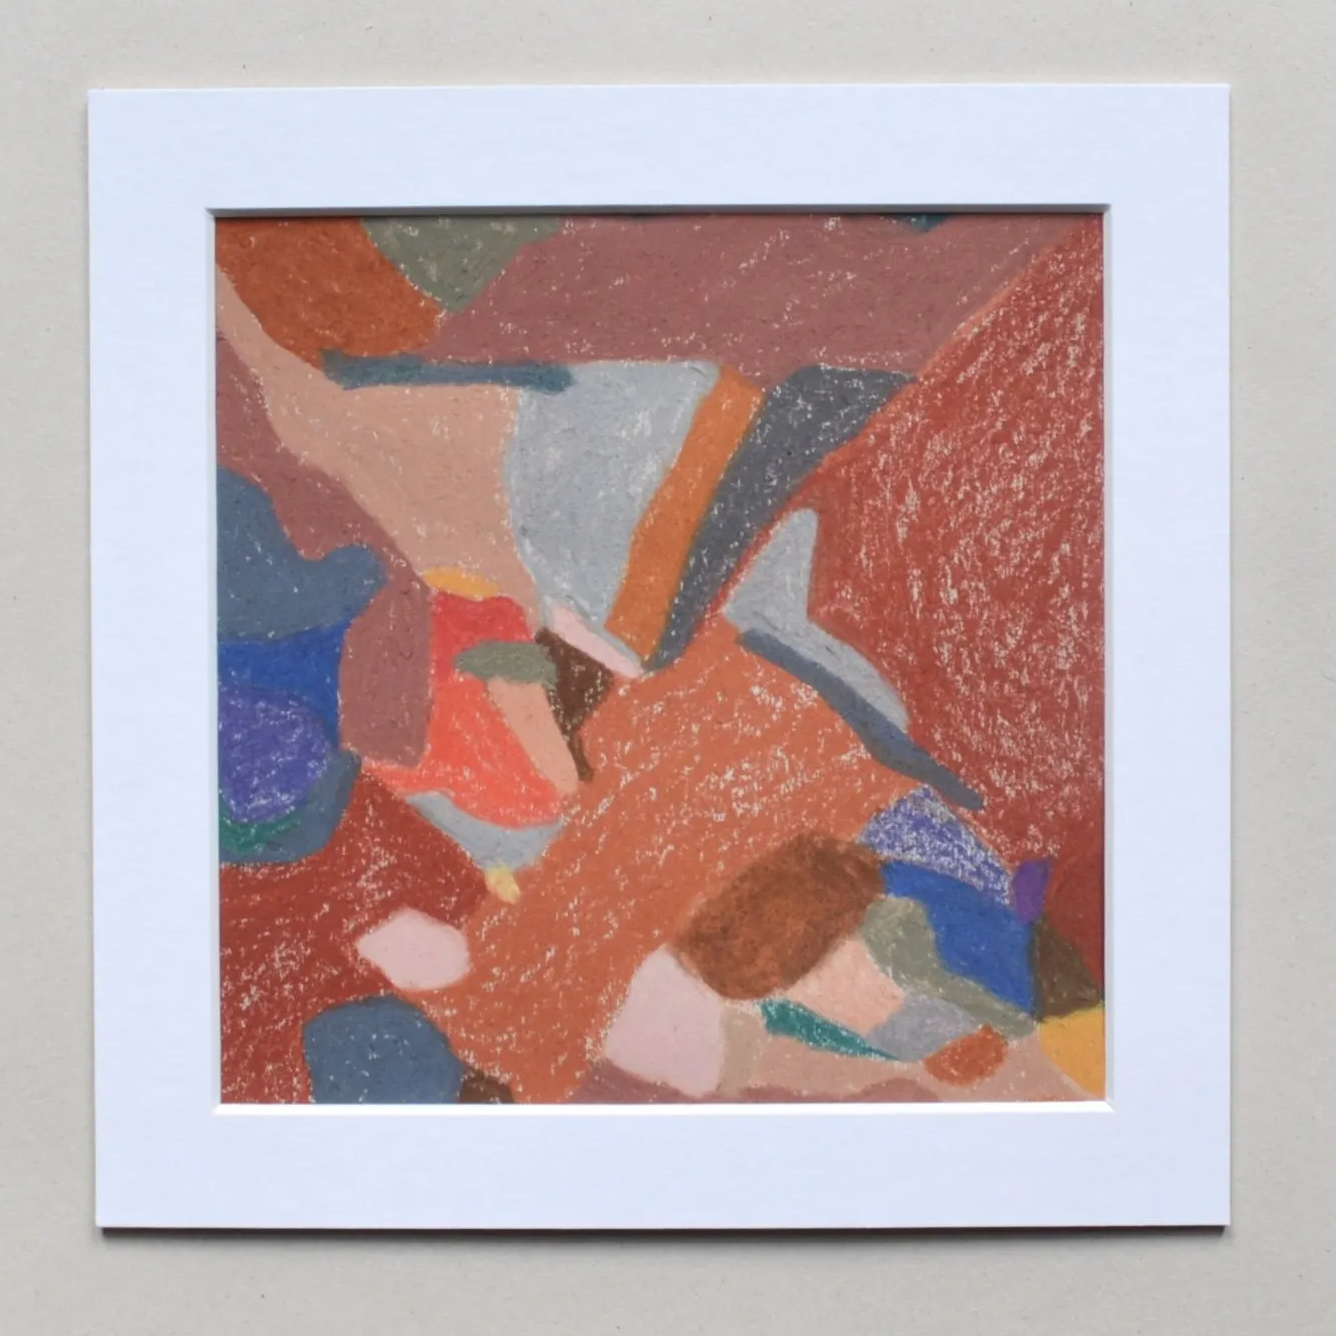 Colourful red and orange abstract drawing with white border on grey background